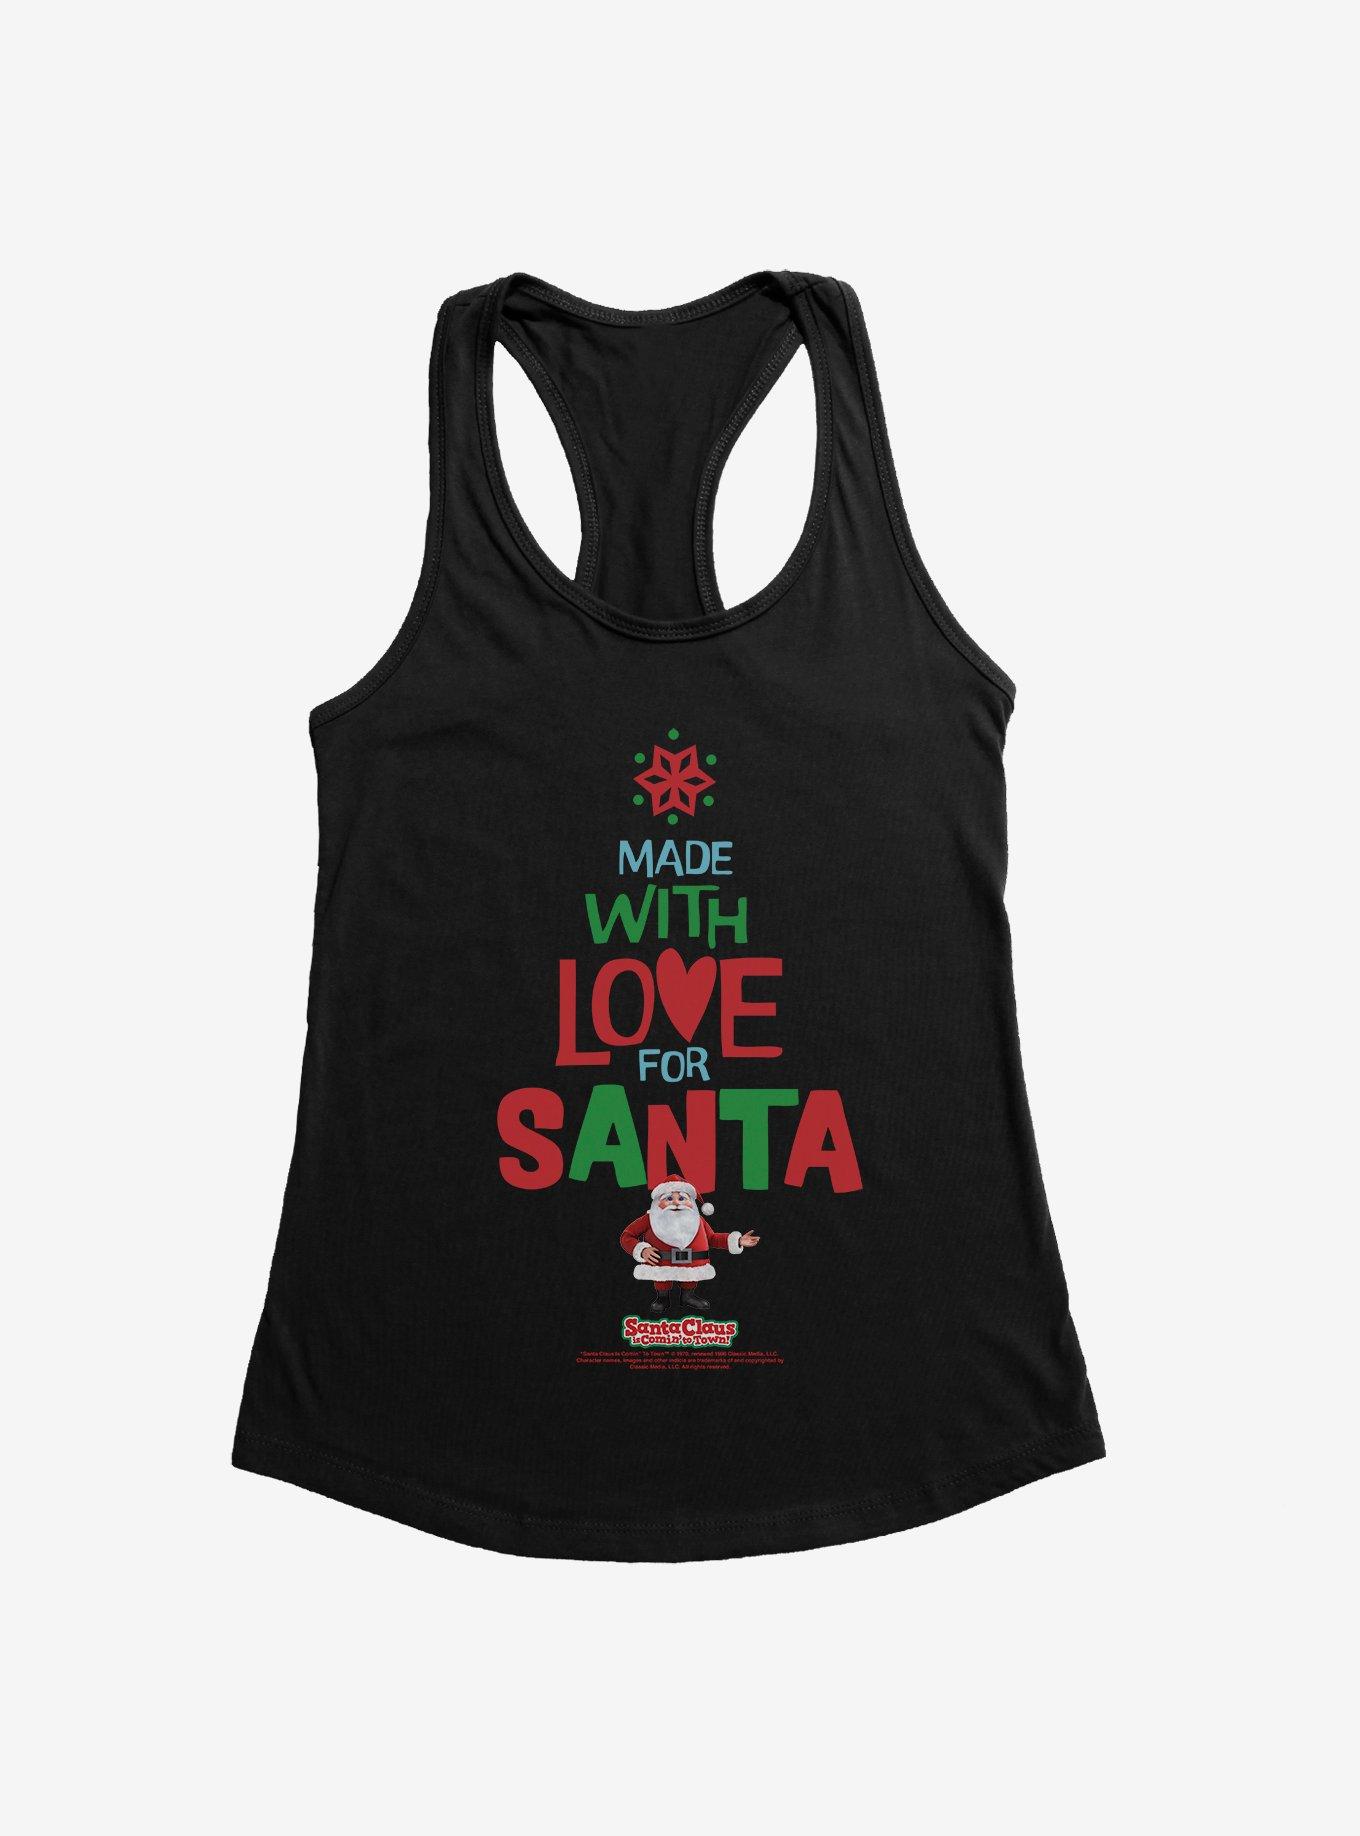 Santa Claus Is Comin' To Town! Made With Love For Girls Tank